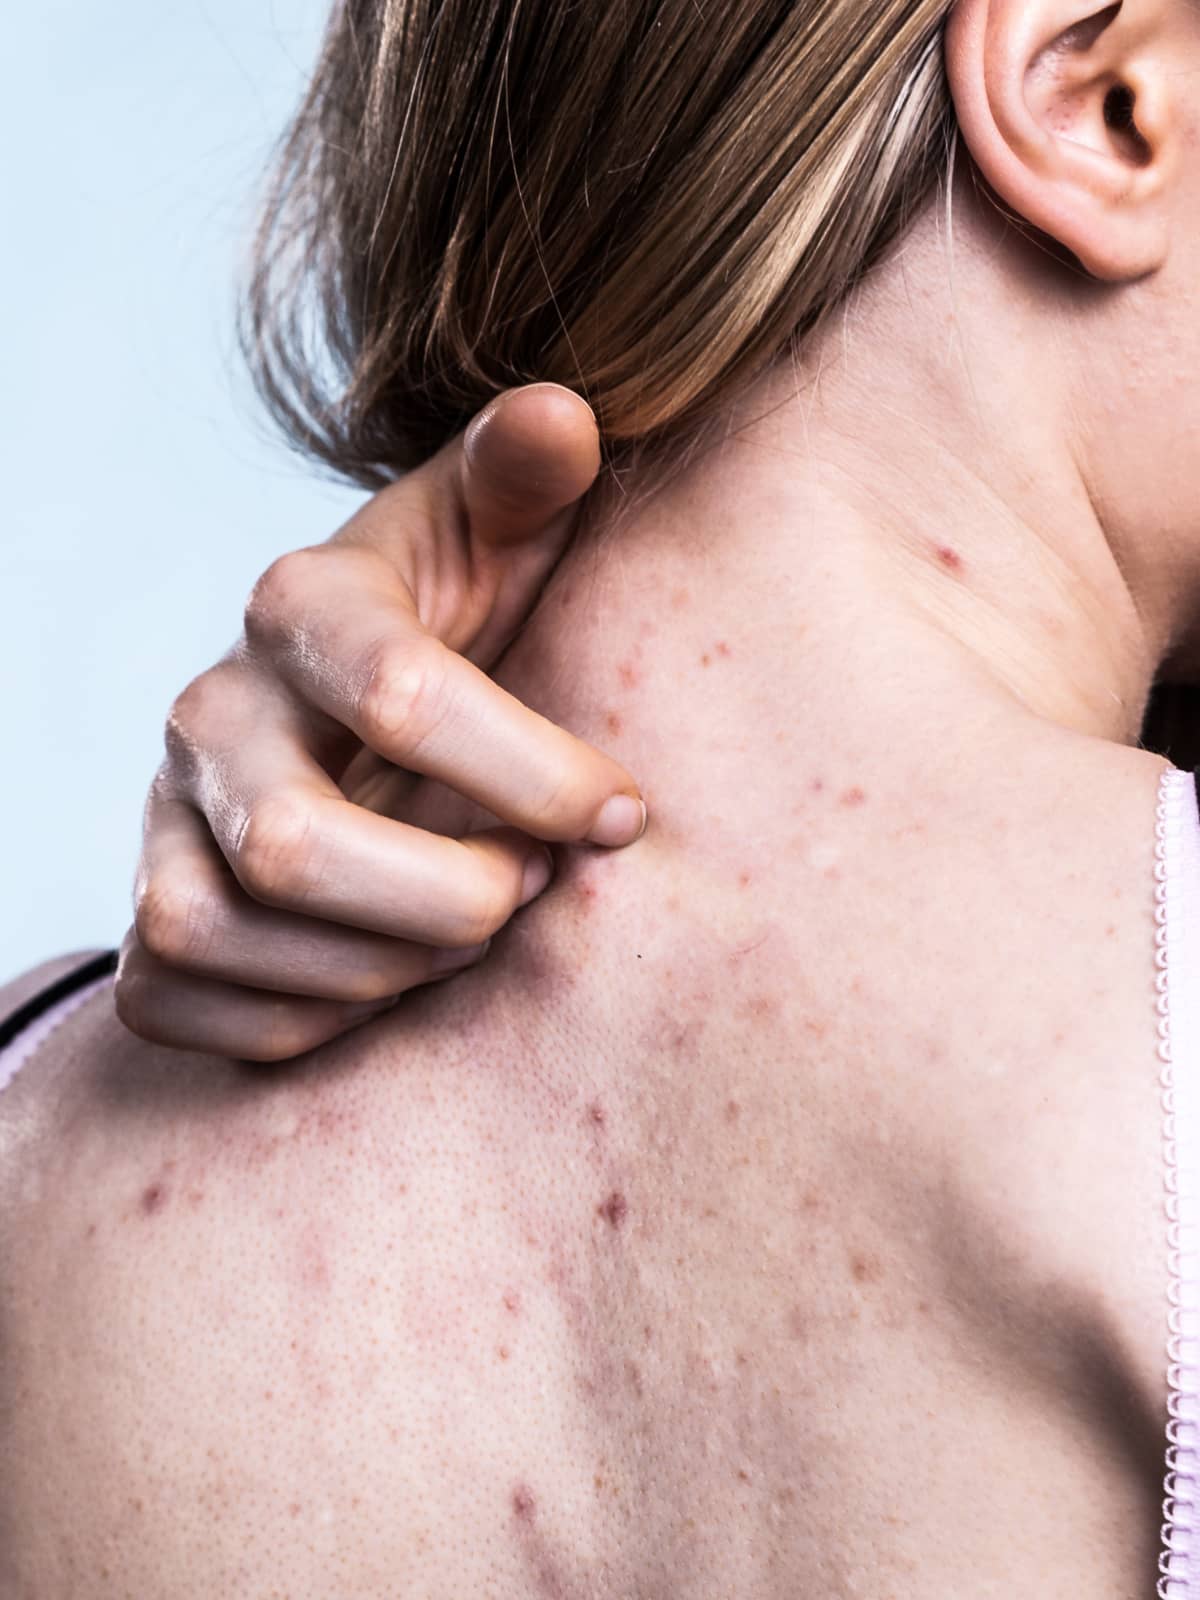 Woman scratching the back of her neck where she has back acne